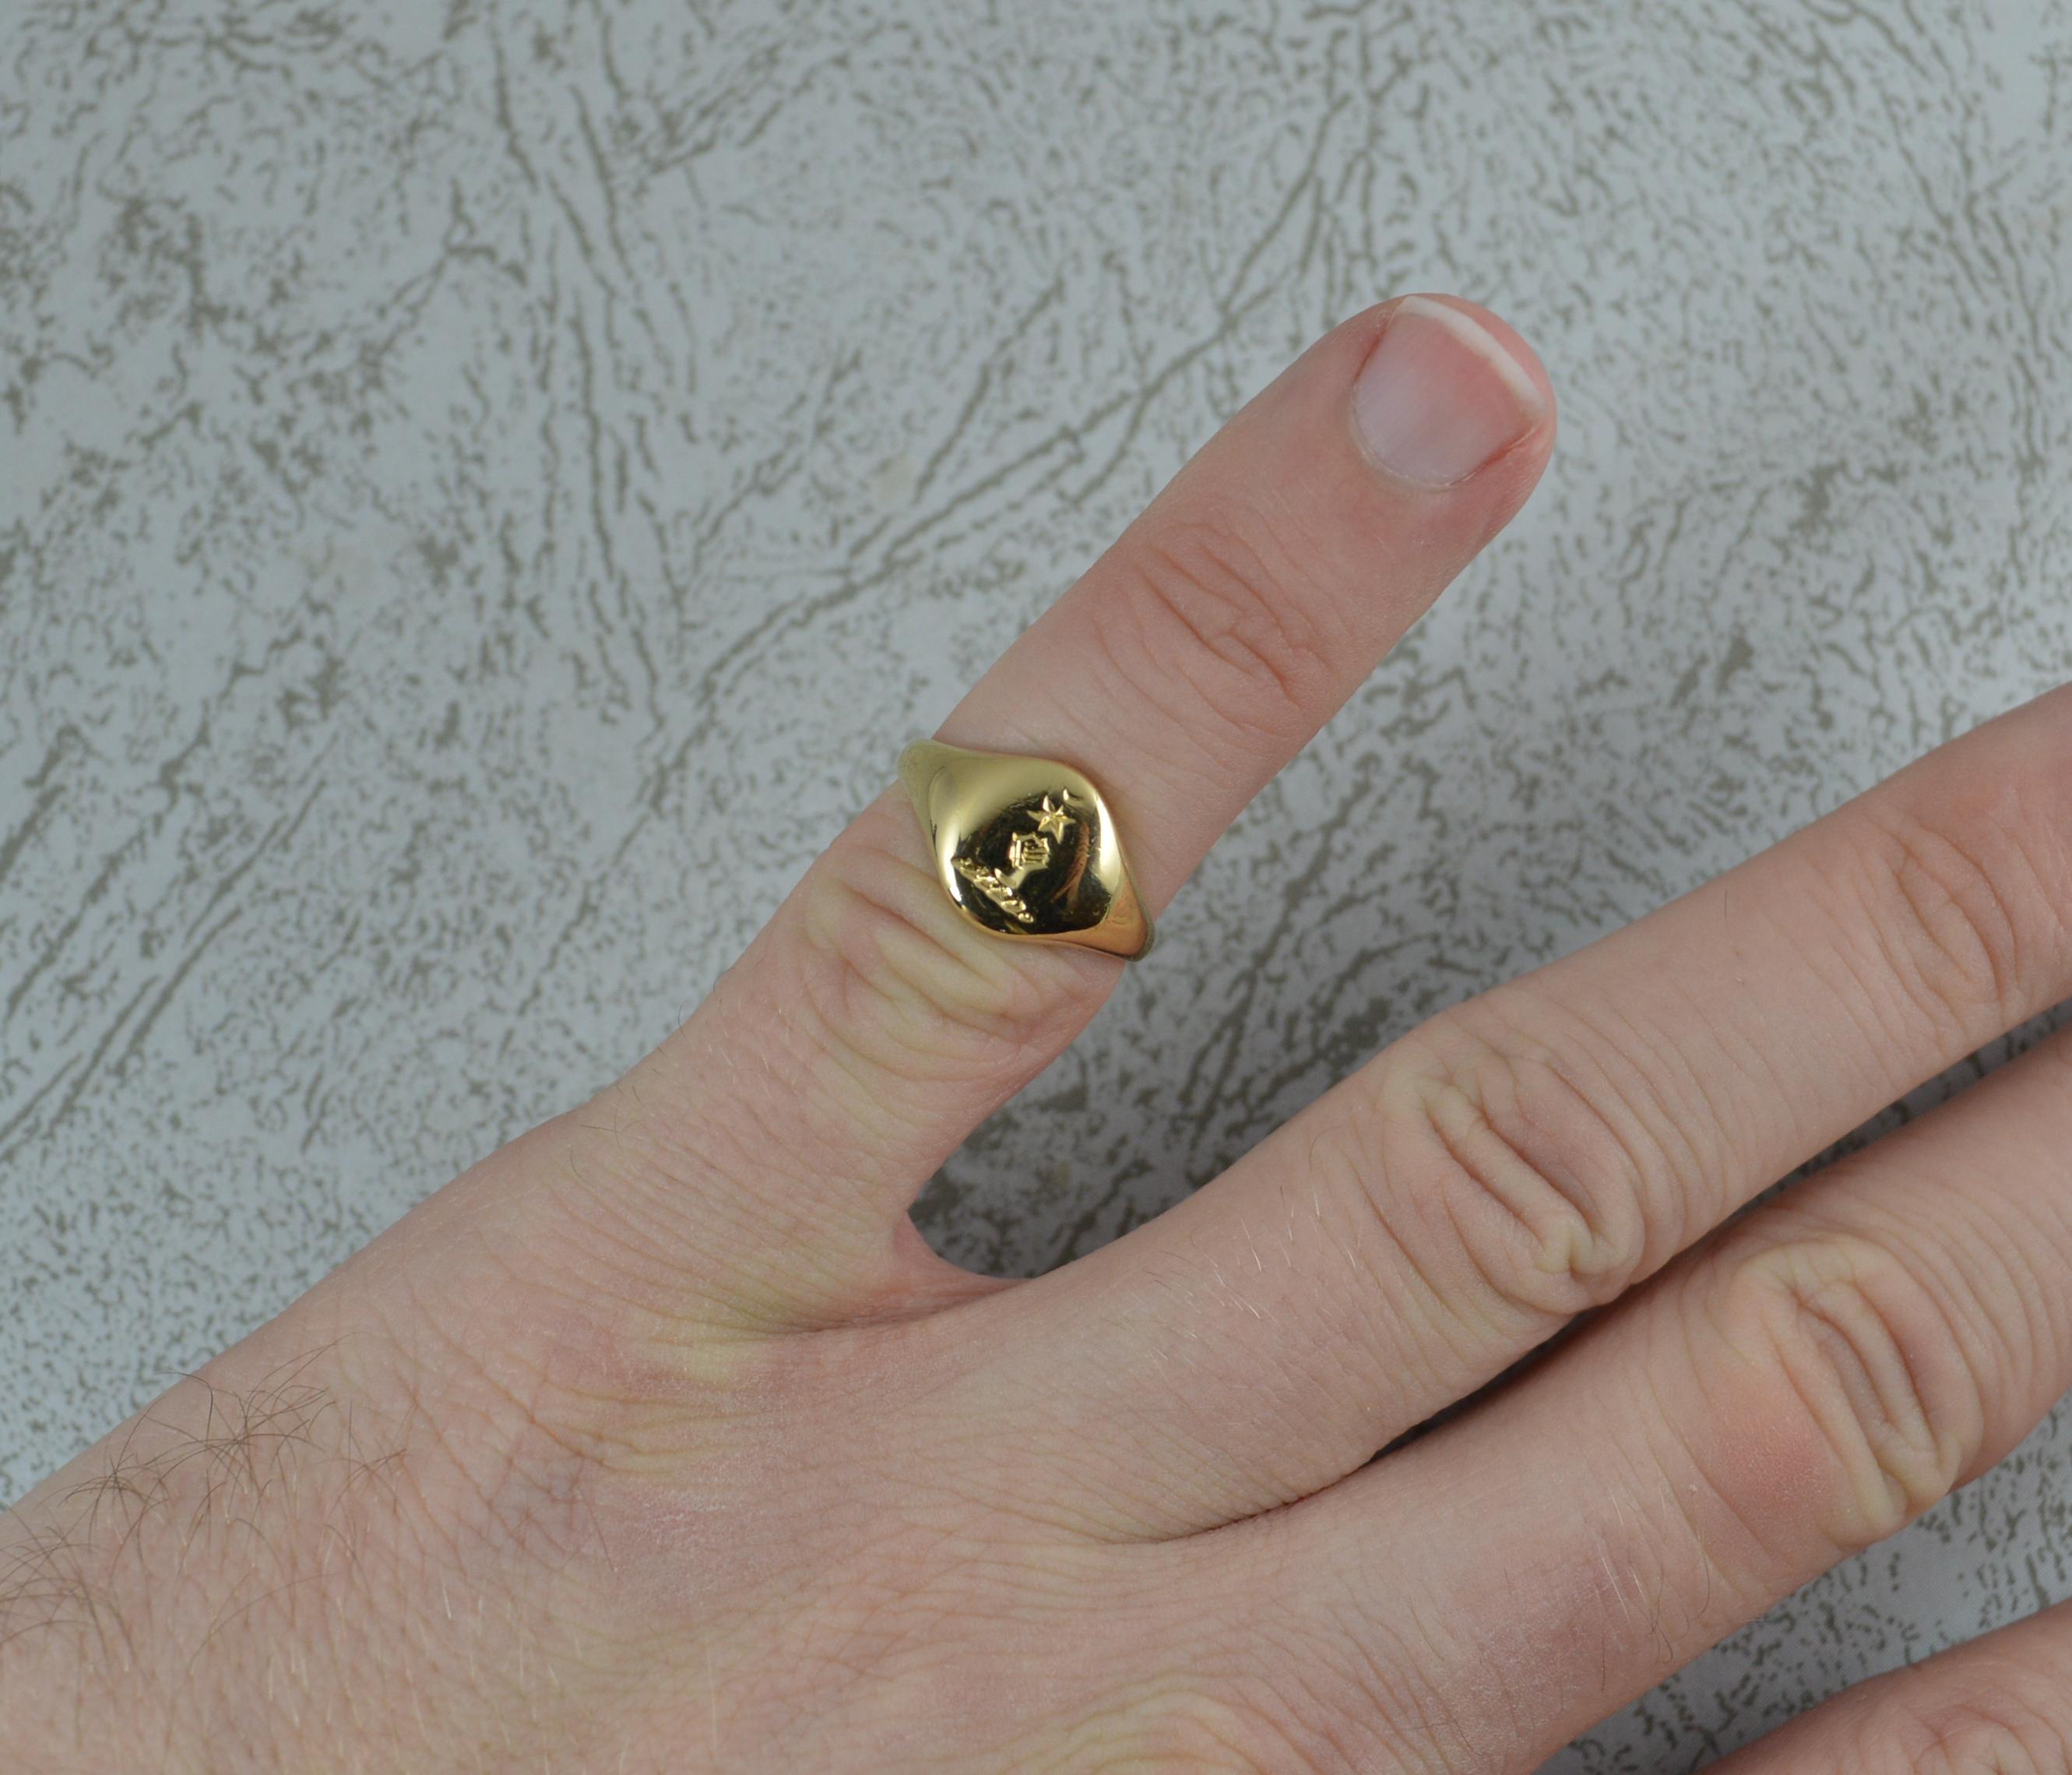 A superb pinky intaglio signet ring.
Solid 18 carat yellow gold example.
Designed with the clenched fist reaching up from the ground with star above
8mm x 9.5mm head approx.

CONDITION ; Very good. Clean solid shank. Crisp intaglio. Polished. Please